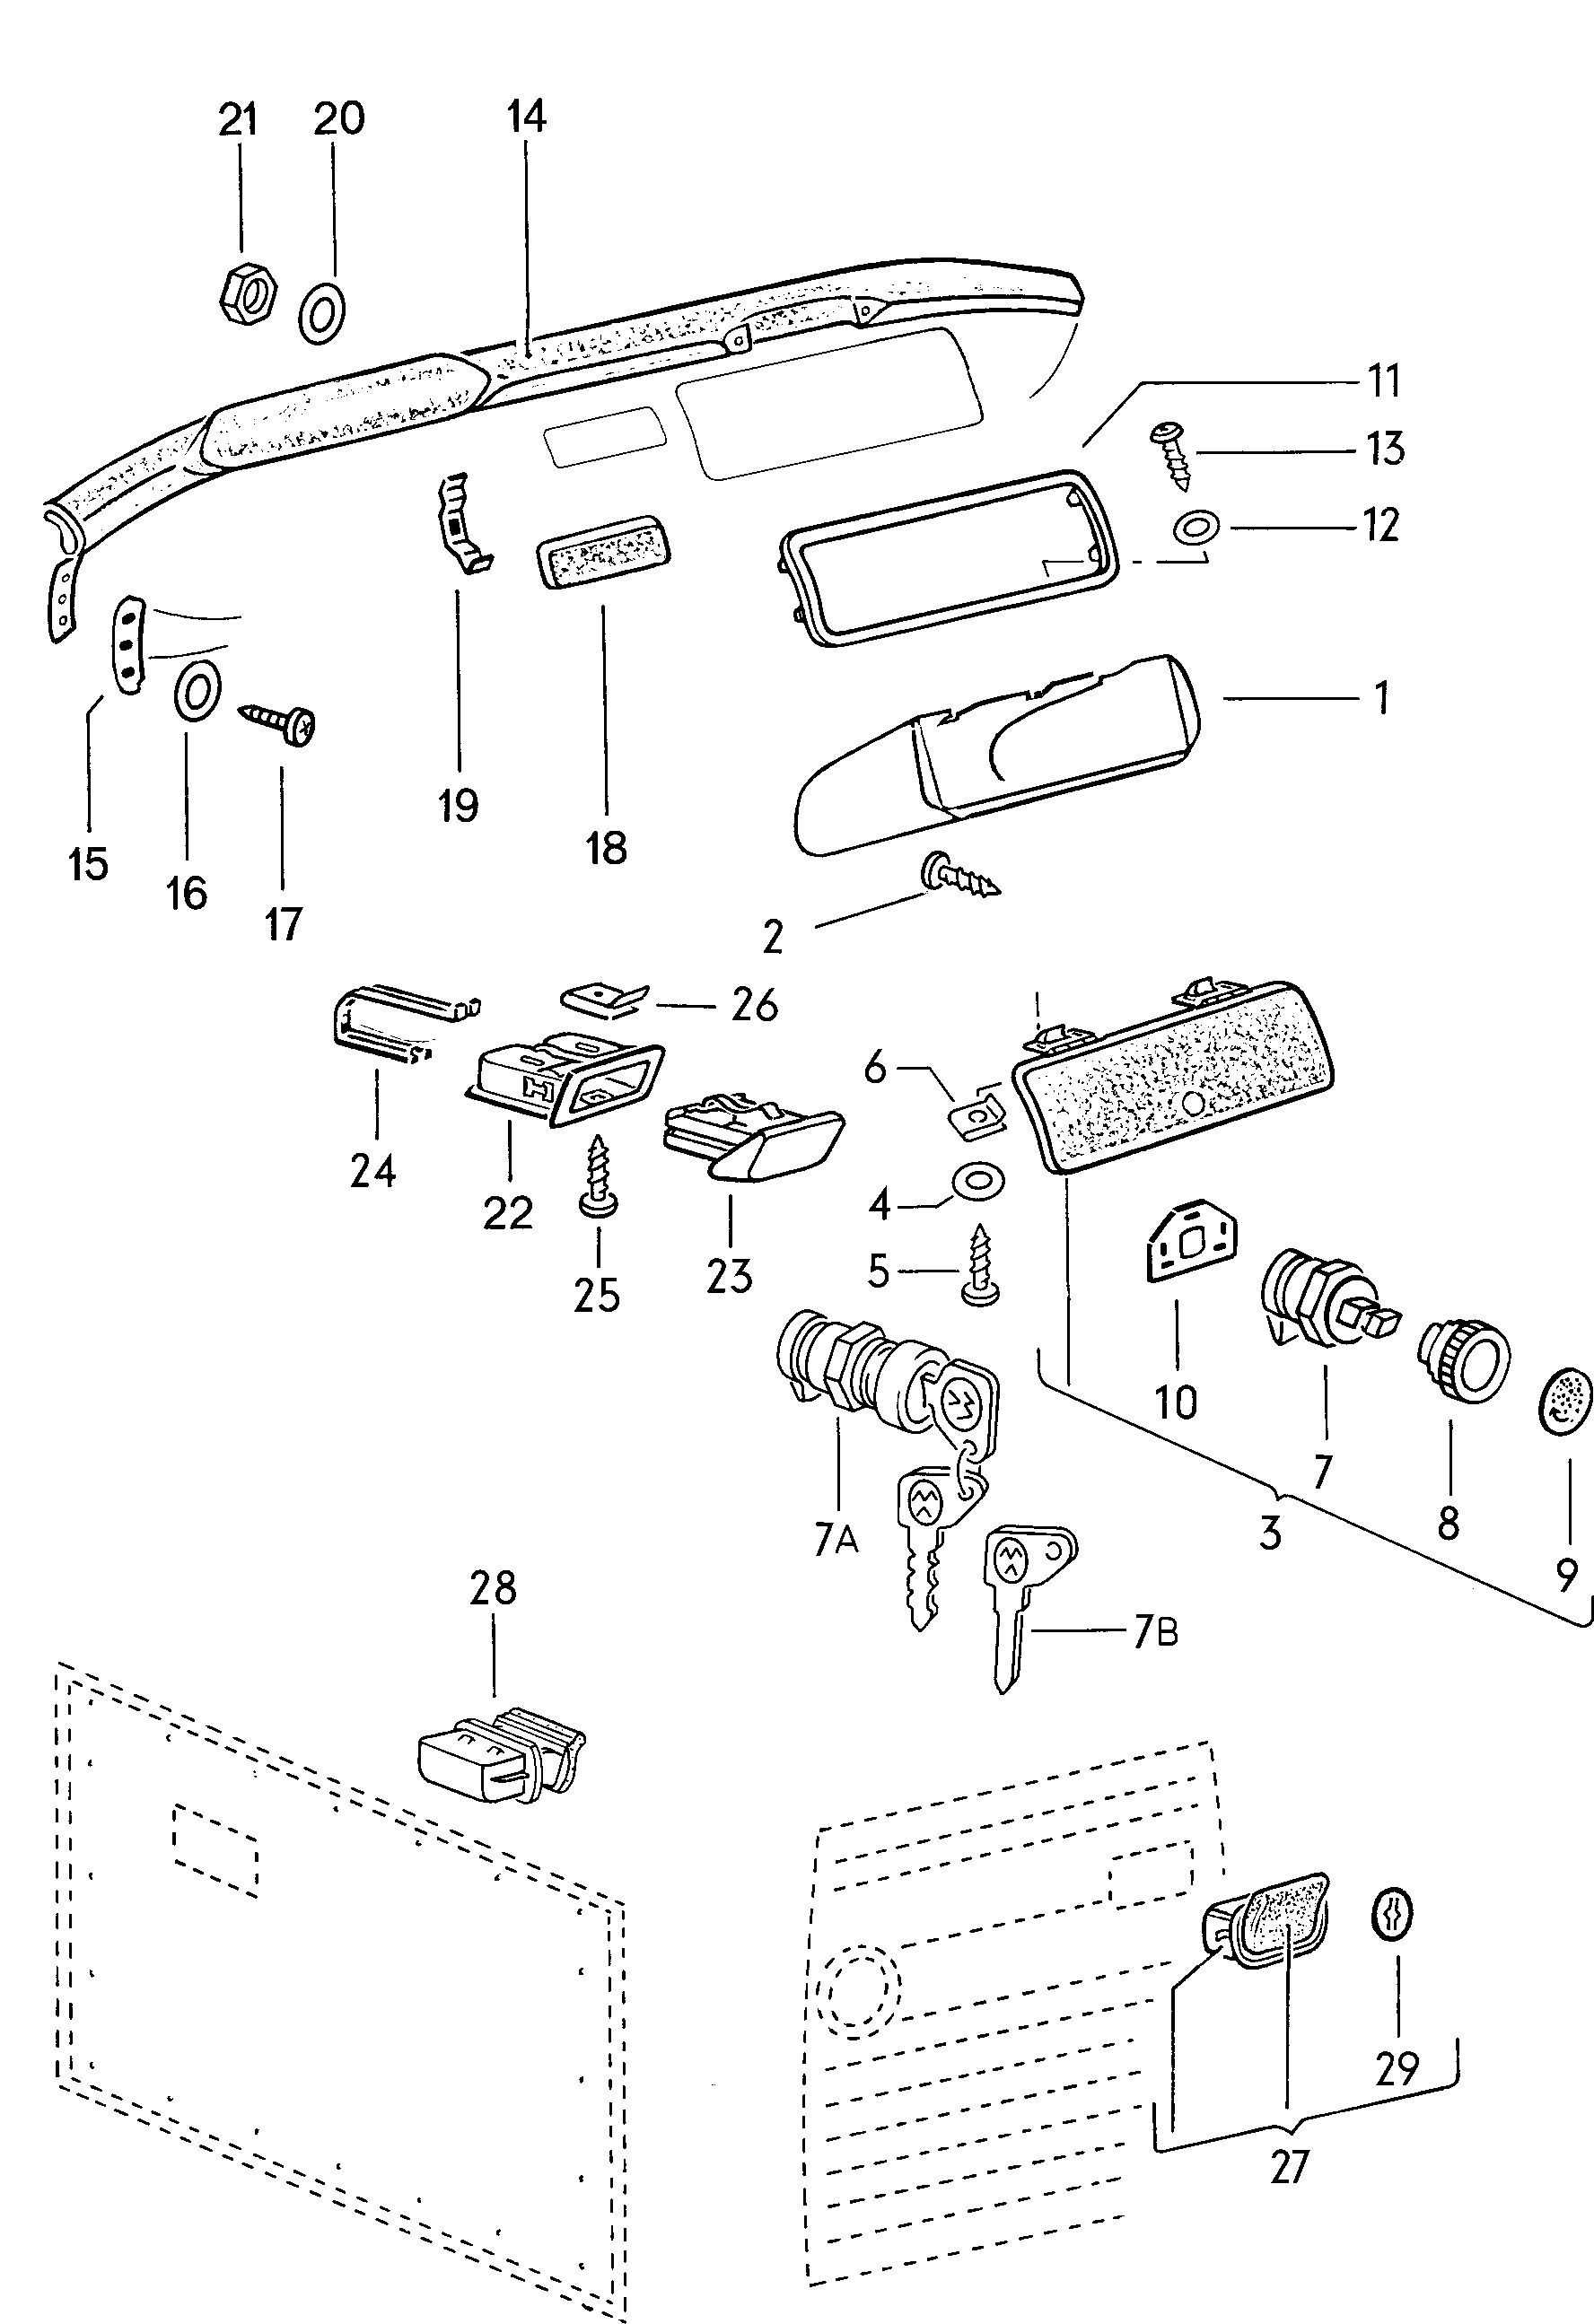 dashboard fittings; ashtray - Typ 2/syncro(T2)  